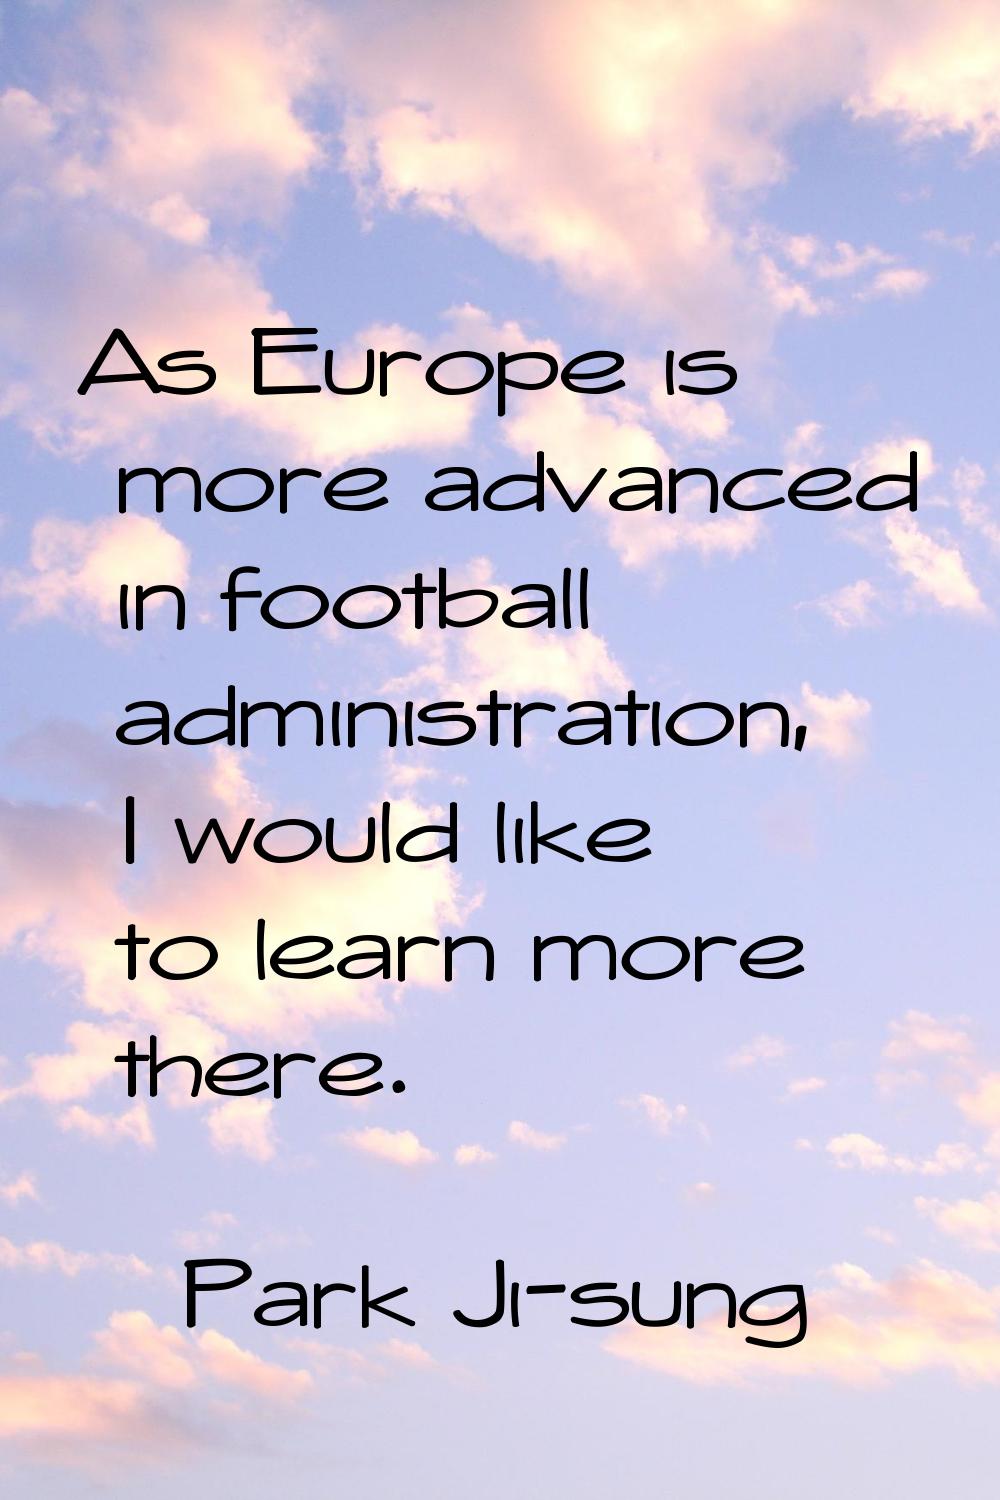 As Europe is more advanced in football administration, I would like to learn more there.